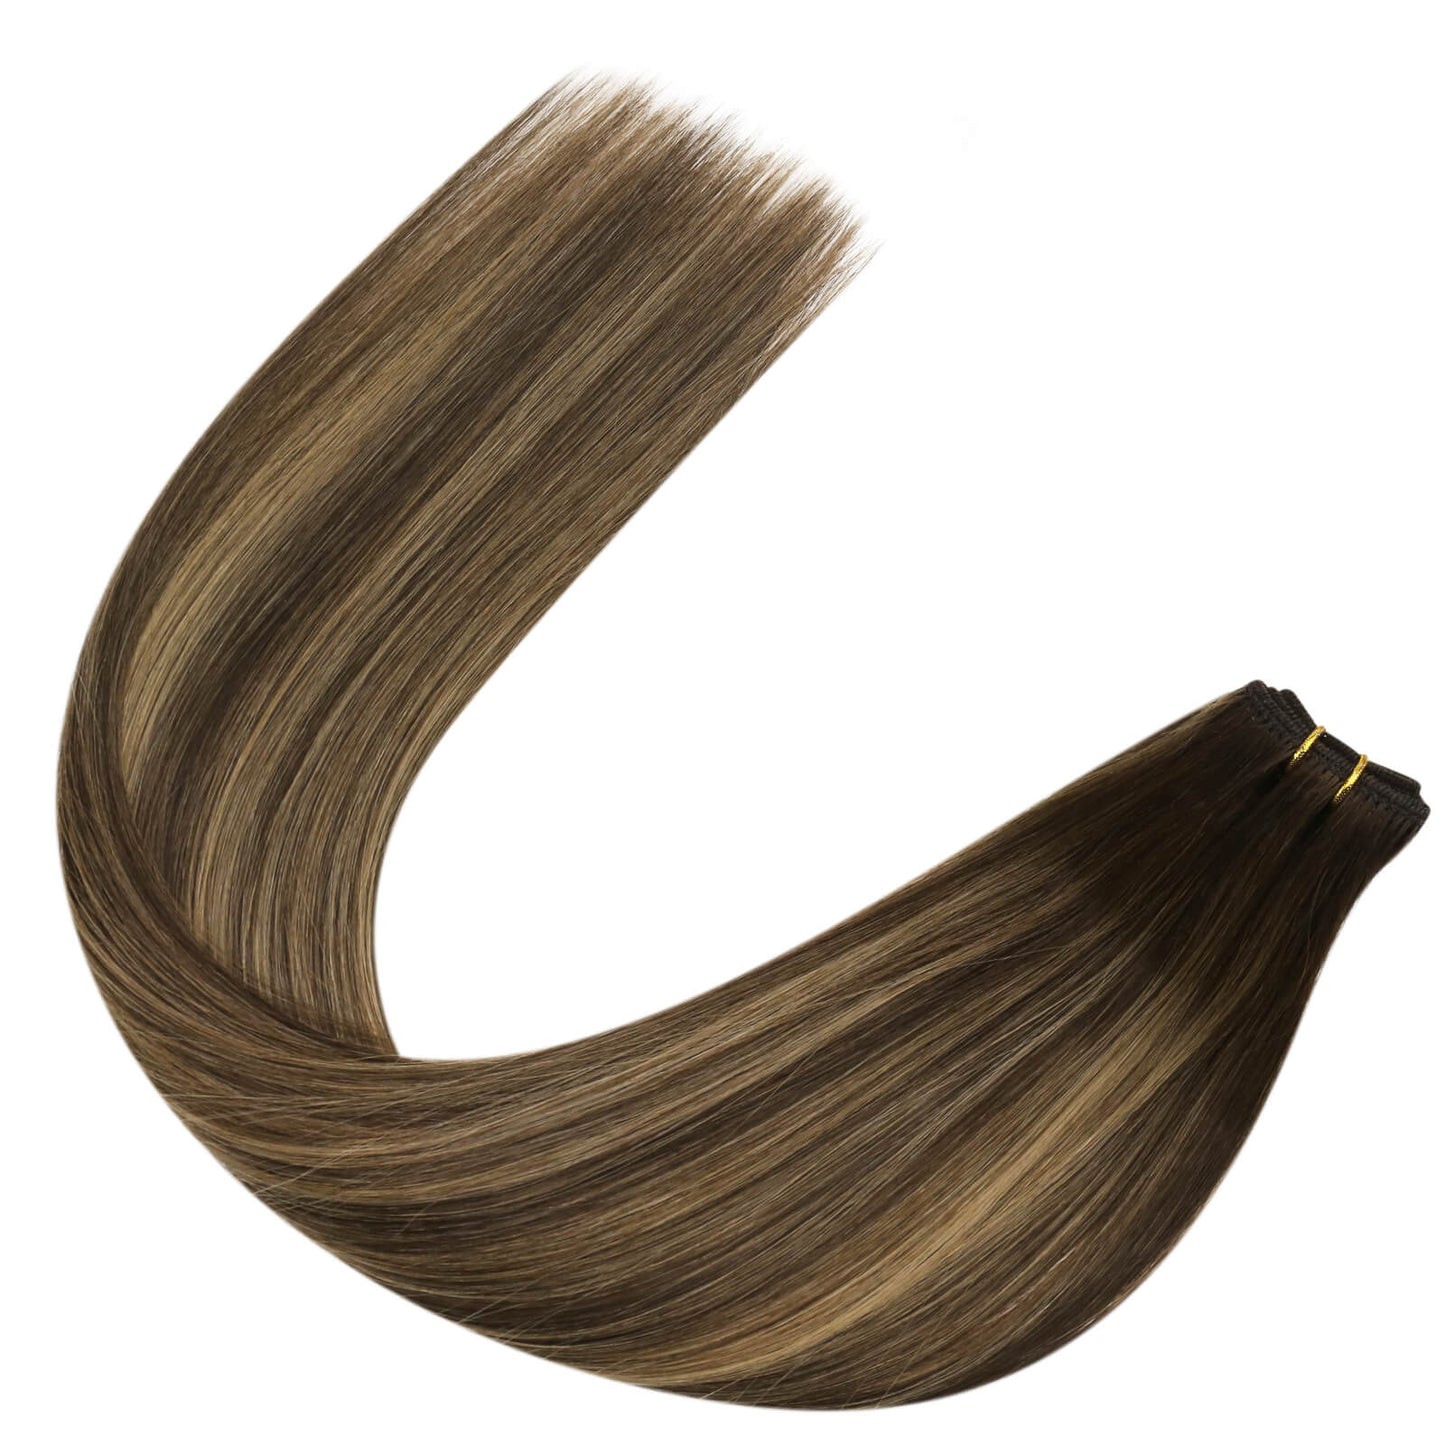 thick virgin hair bundles from weft to bottom